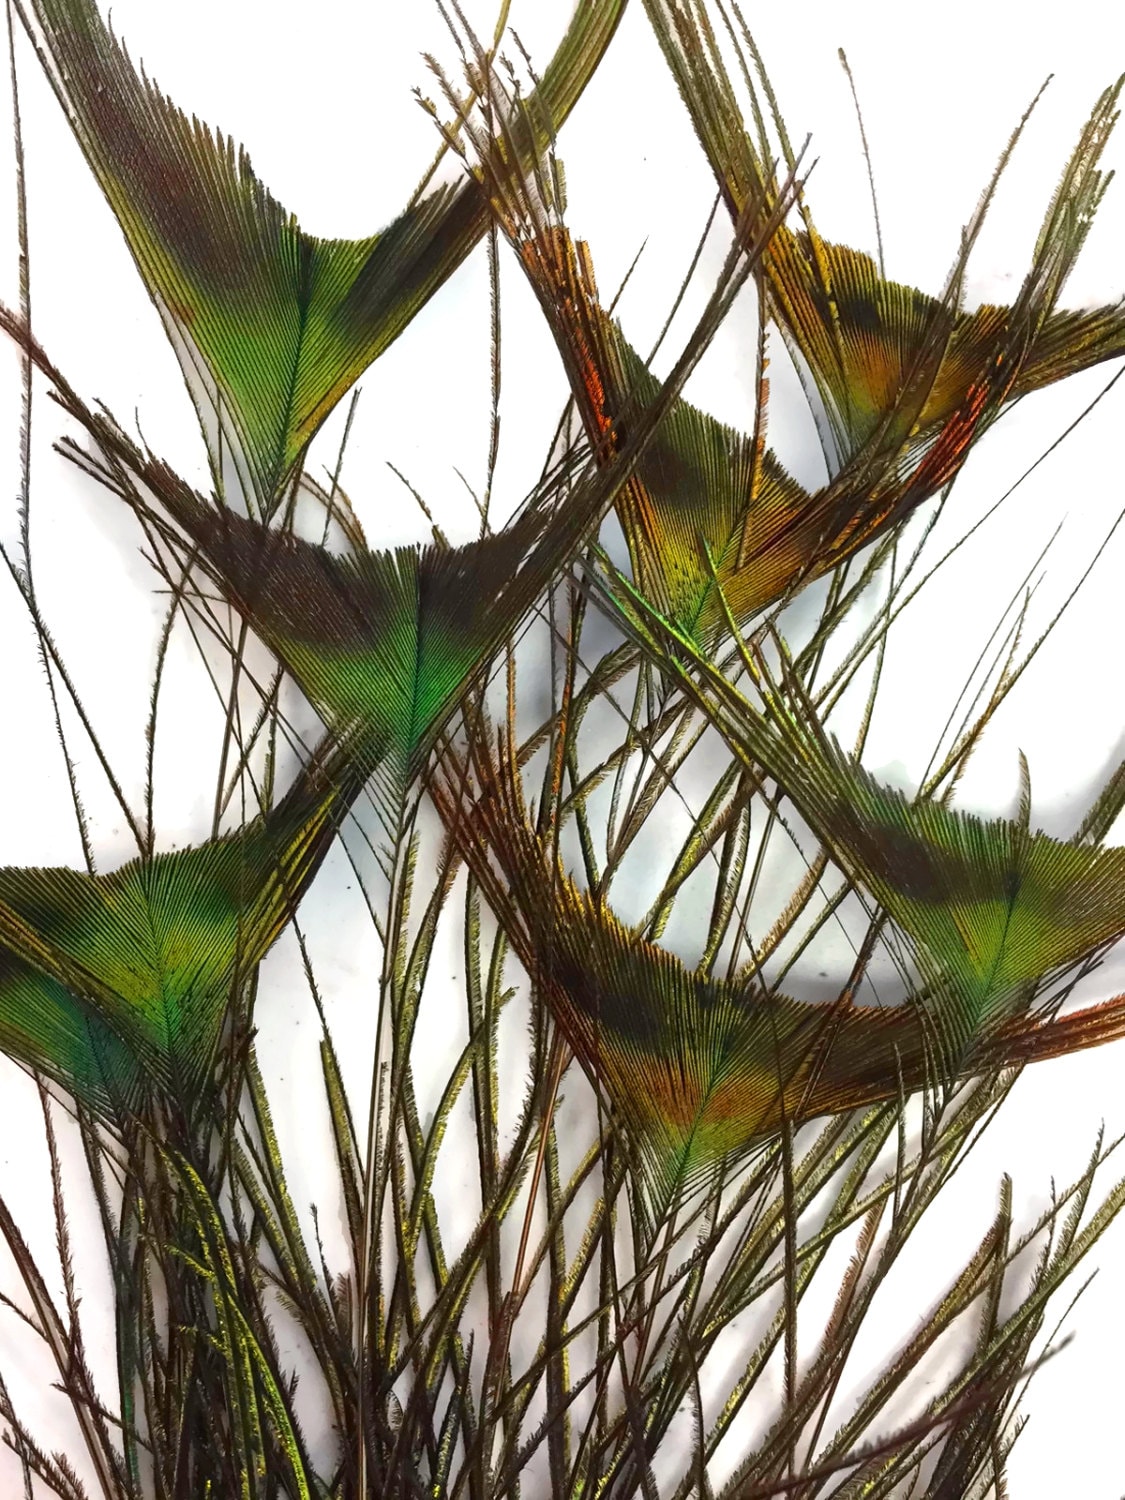 50 Pieces 10-12 Natural Peacock Tail Feathers